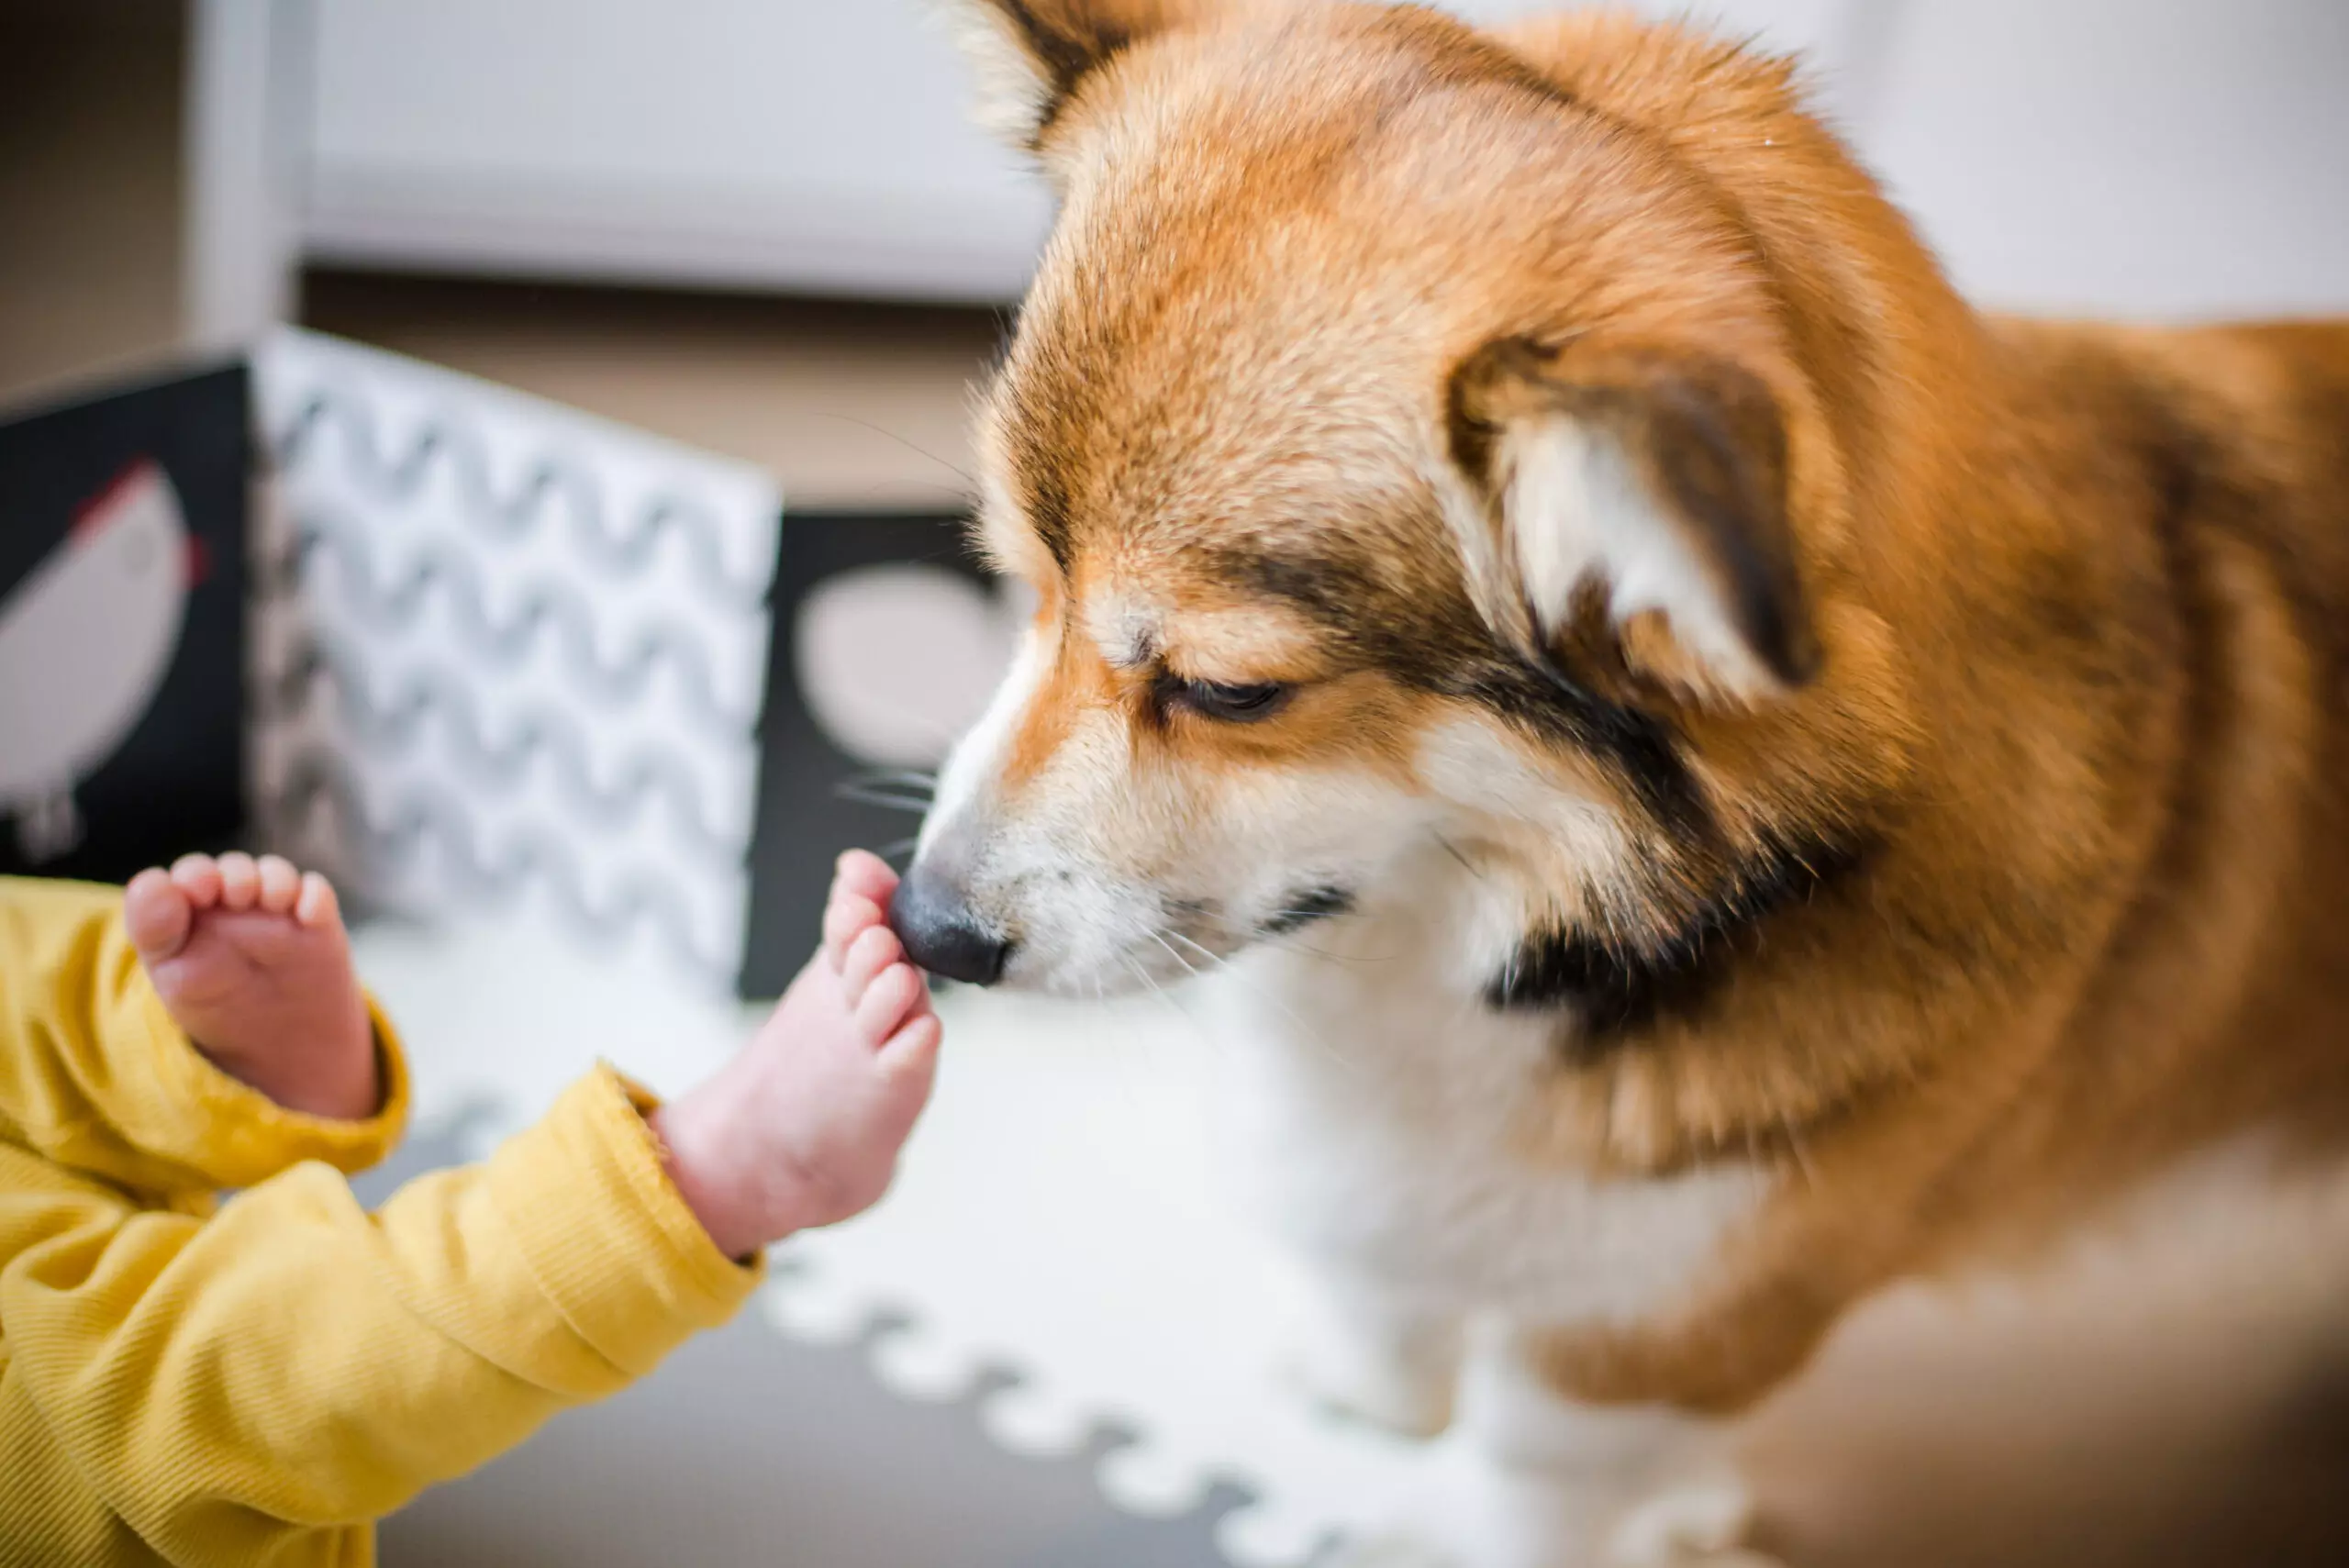 Dogs can sniff PTSD episode onset in human companions: Study